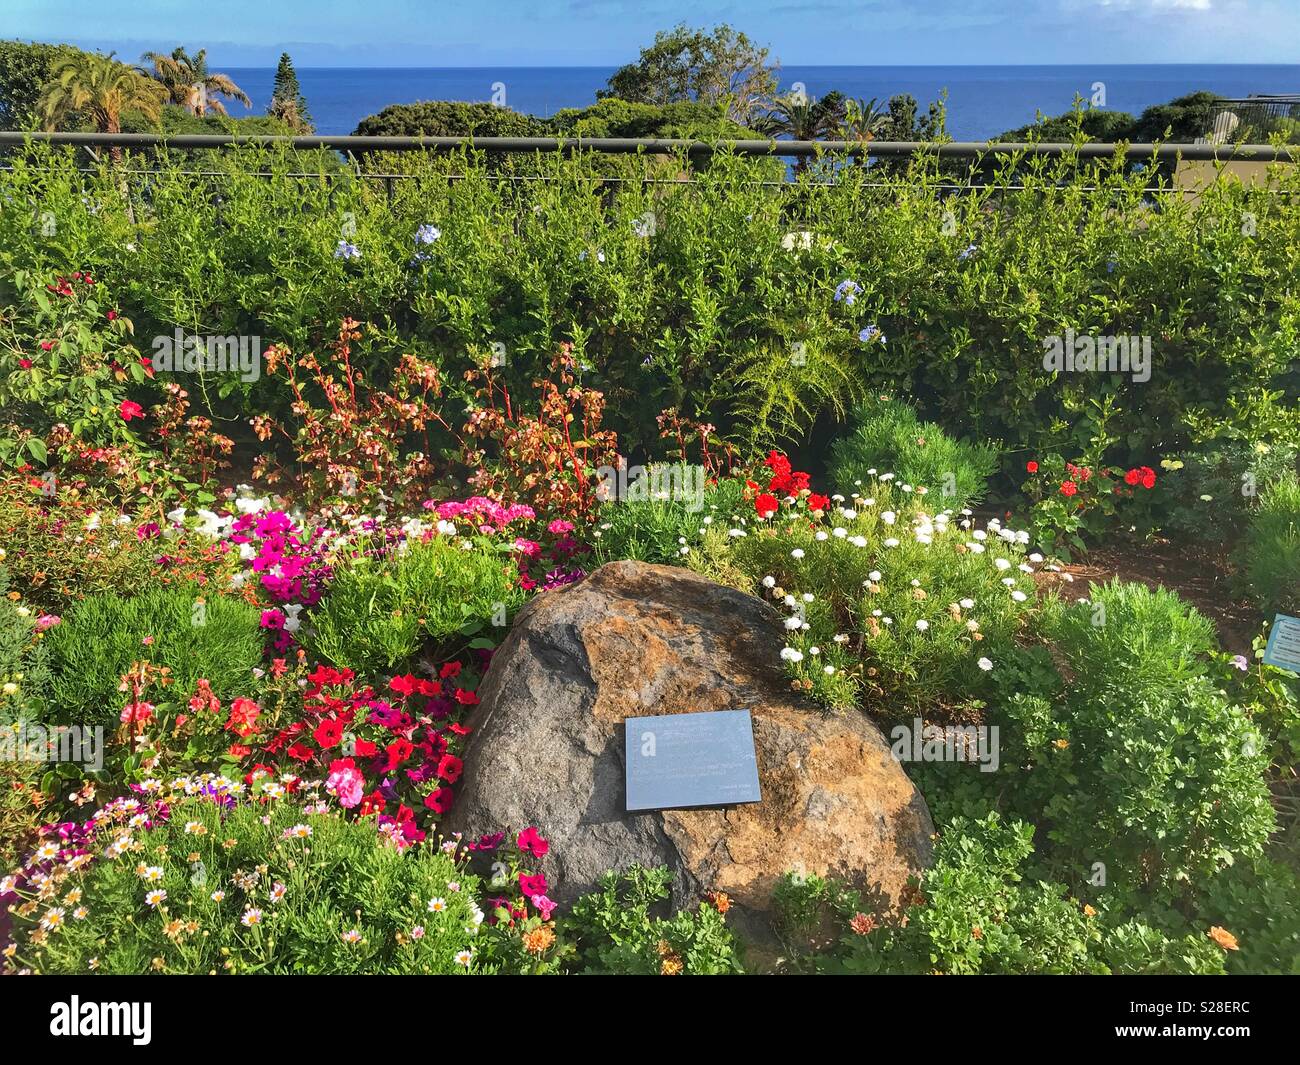 View to the sea from the beautiful gardens of the PortoBay Hotel Resort, Funchal, Madeira, Portugal Stock Photo